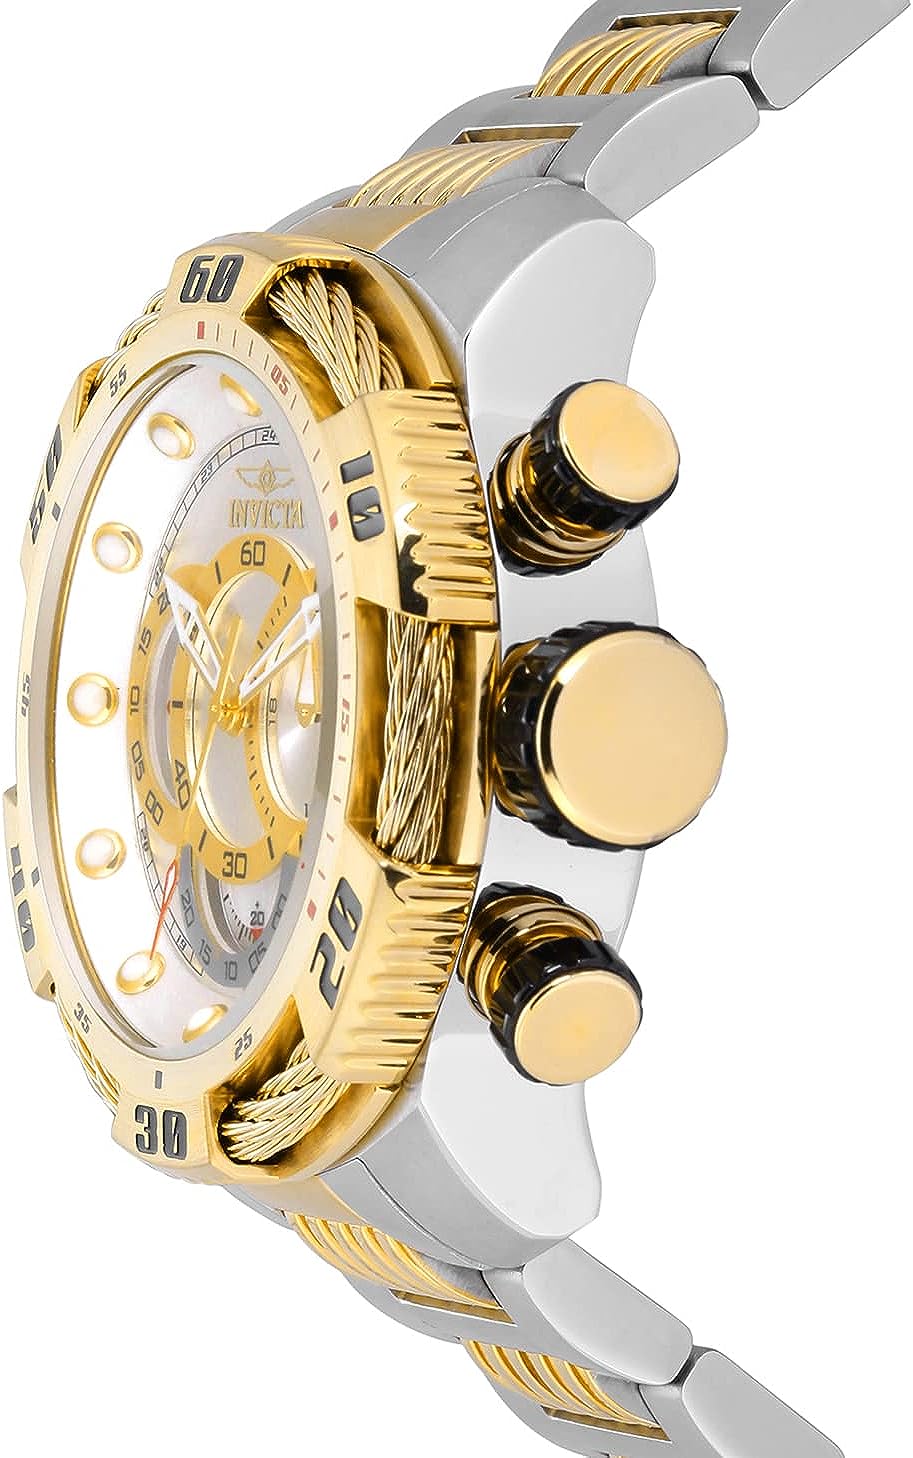 Speedway Analog Display Quartz Two Tone Watch, Gold/Stainless Steel